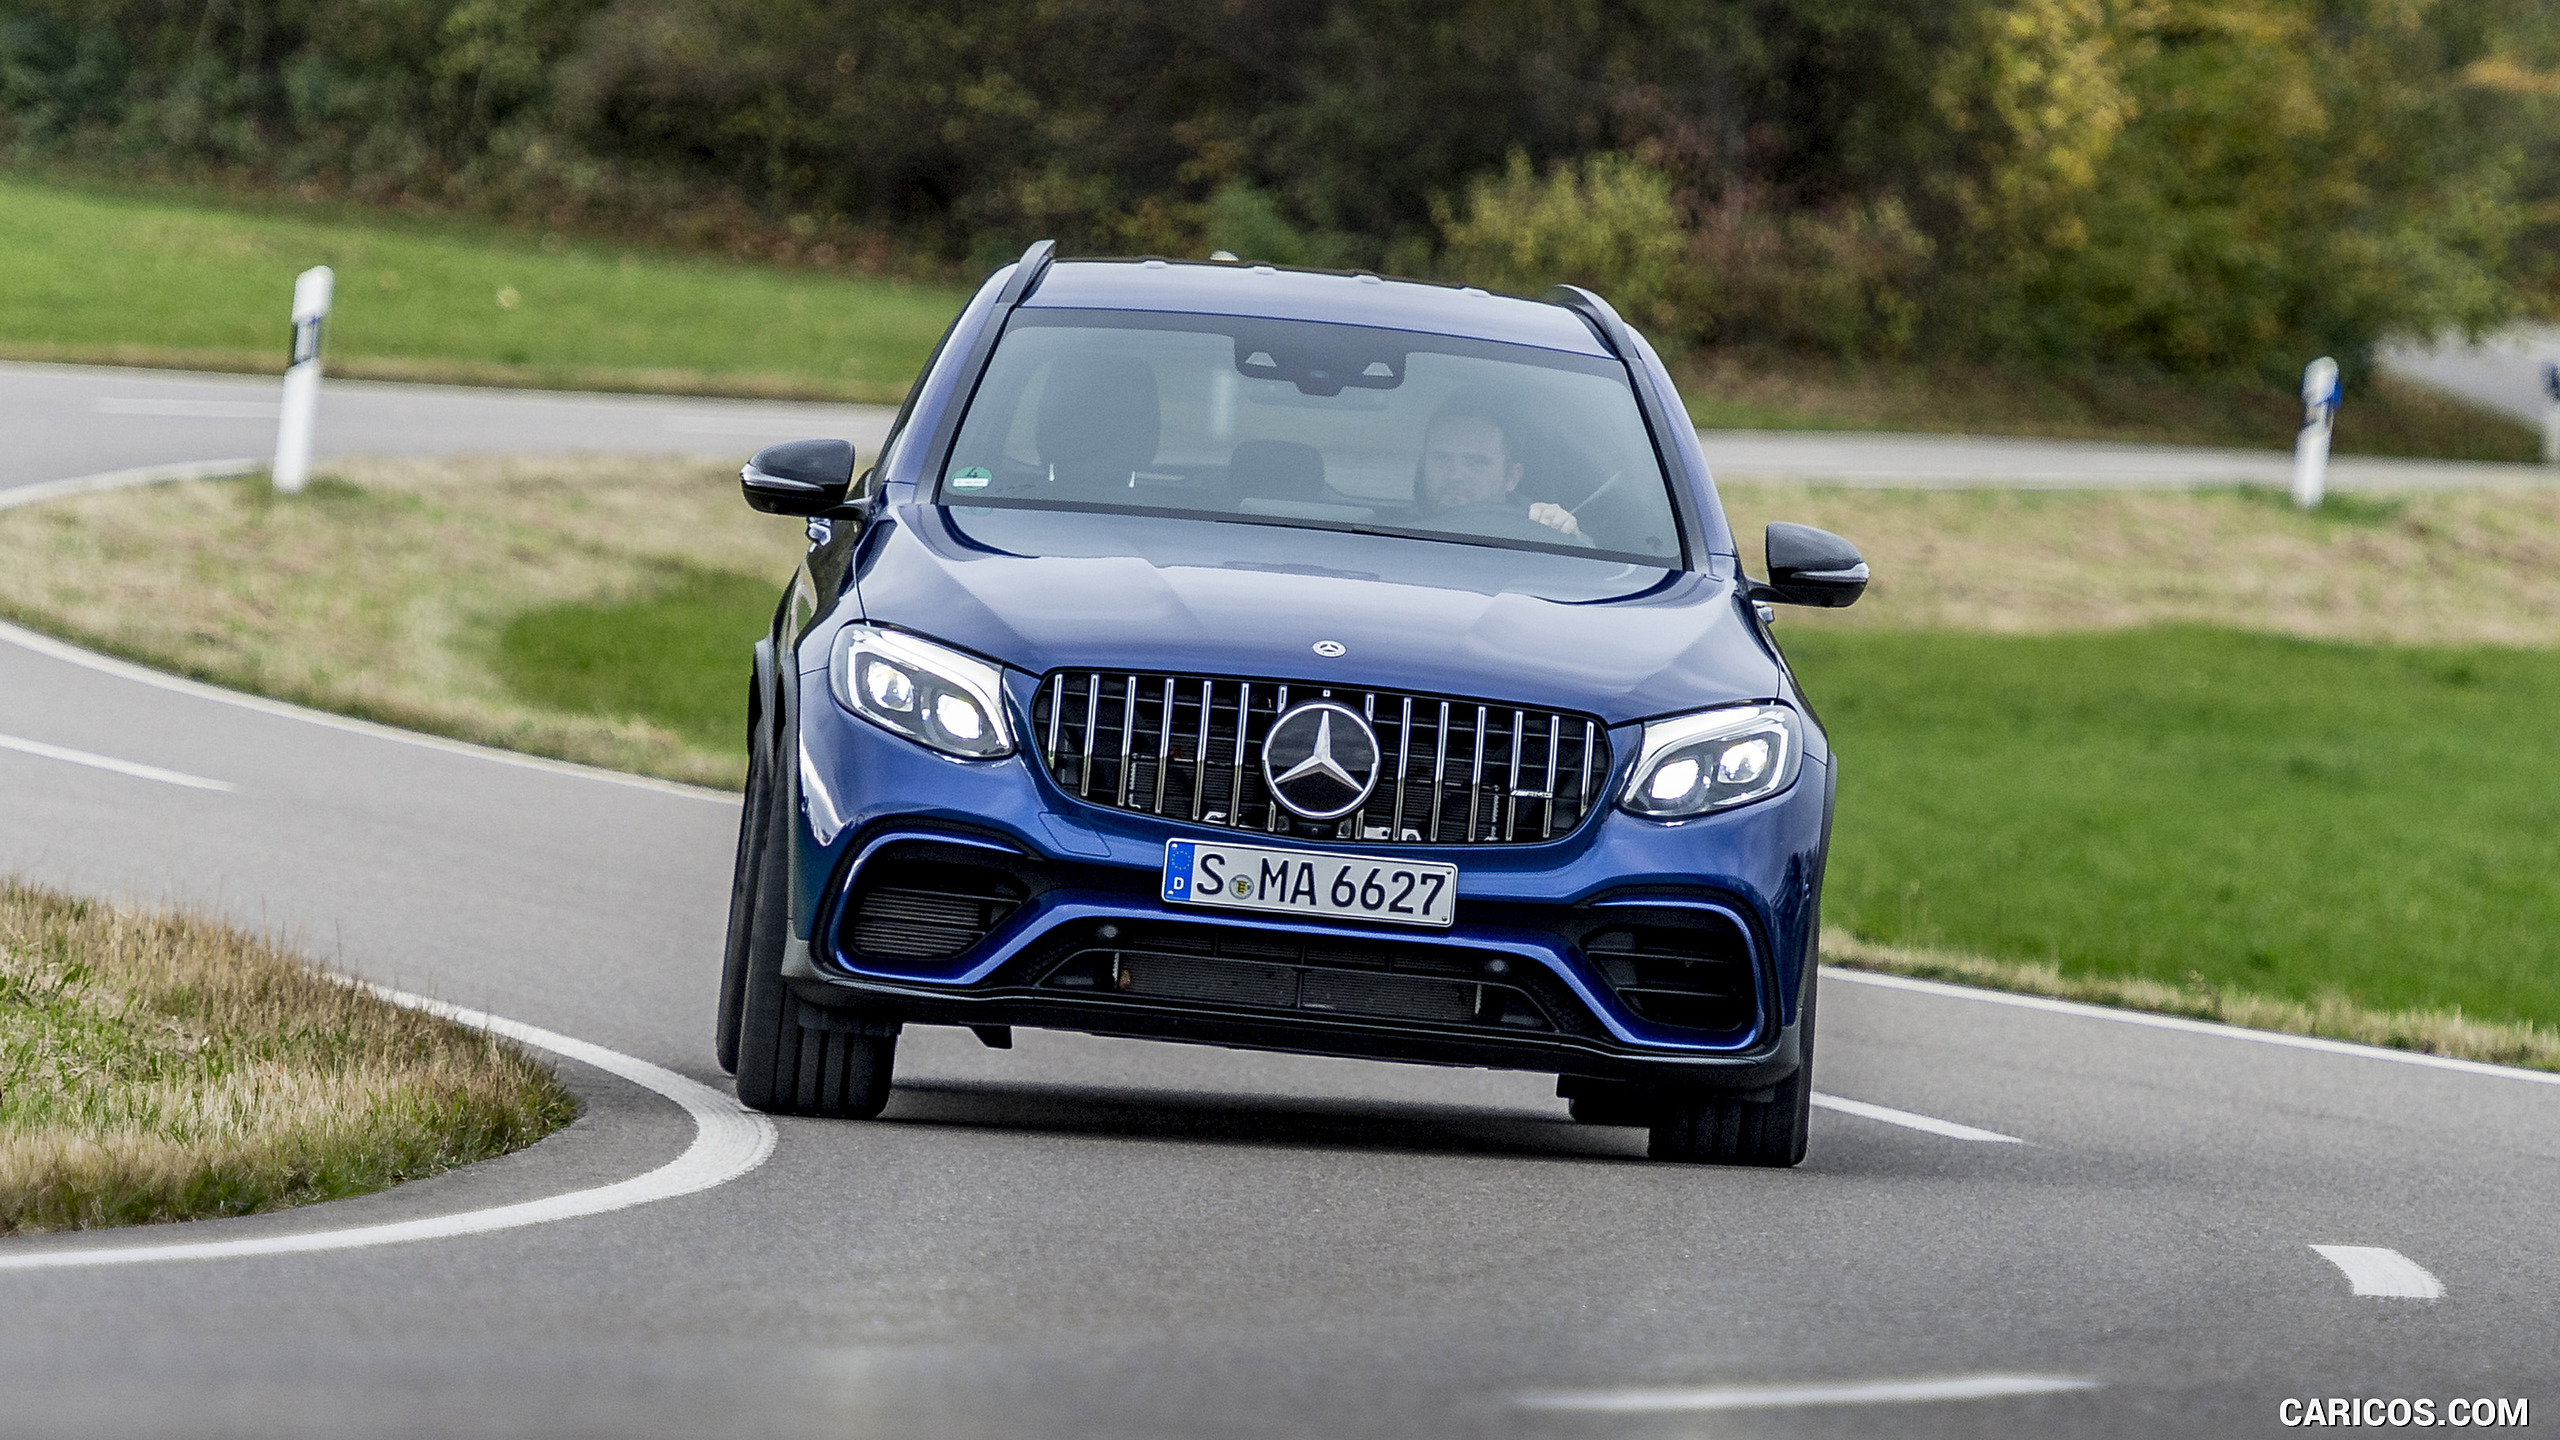 2018 Mercedes-AMG GLC 63 - Front, #35 of 115